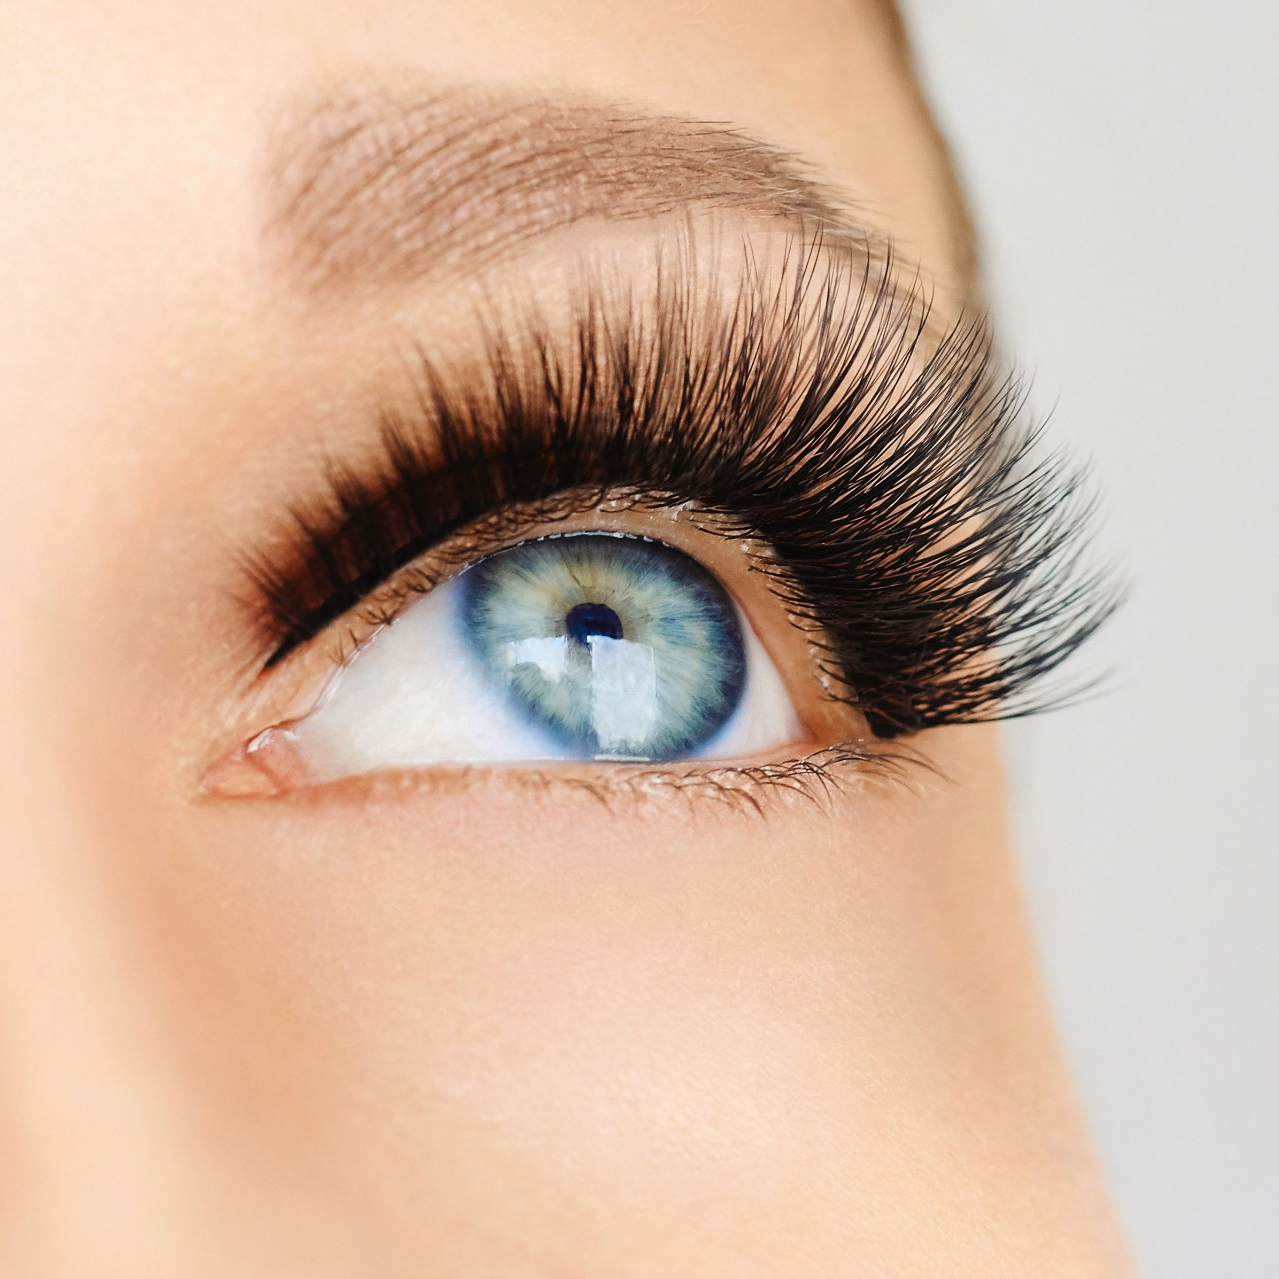 Best Lashes at Brushed Studio in Huntington Beach 714-536-2277